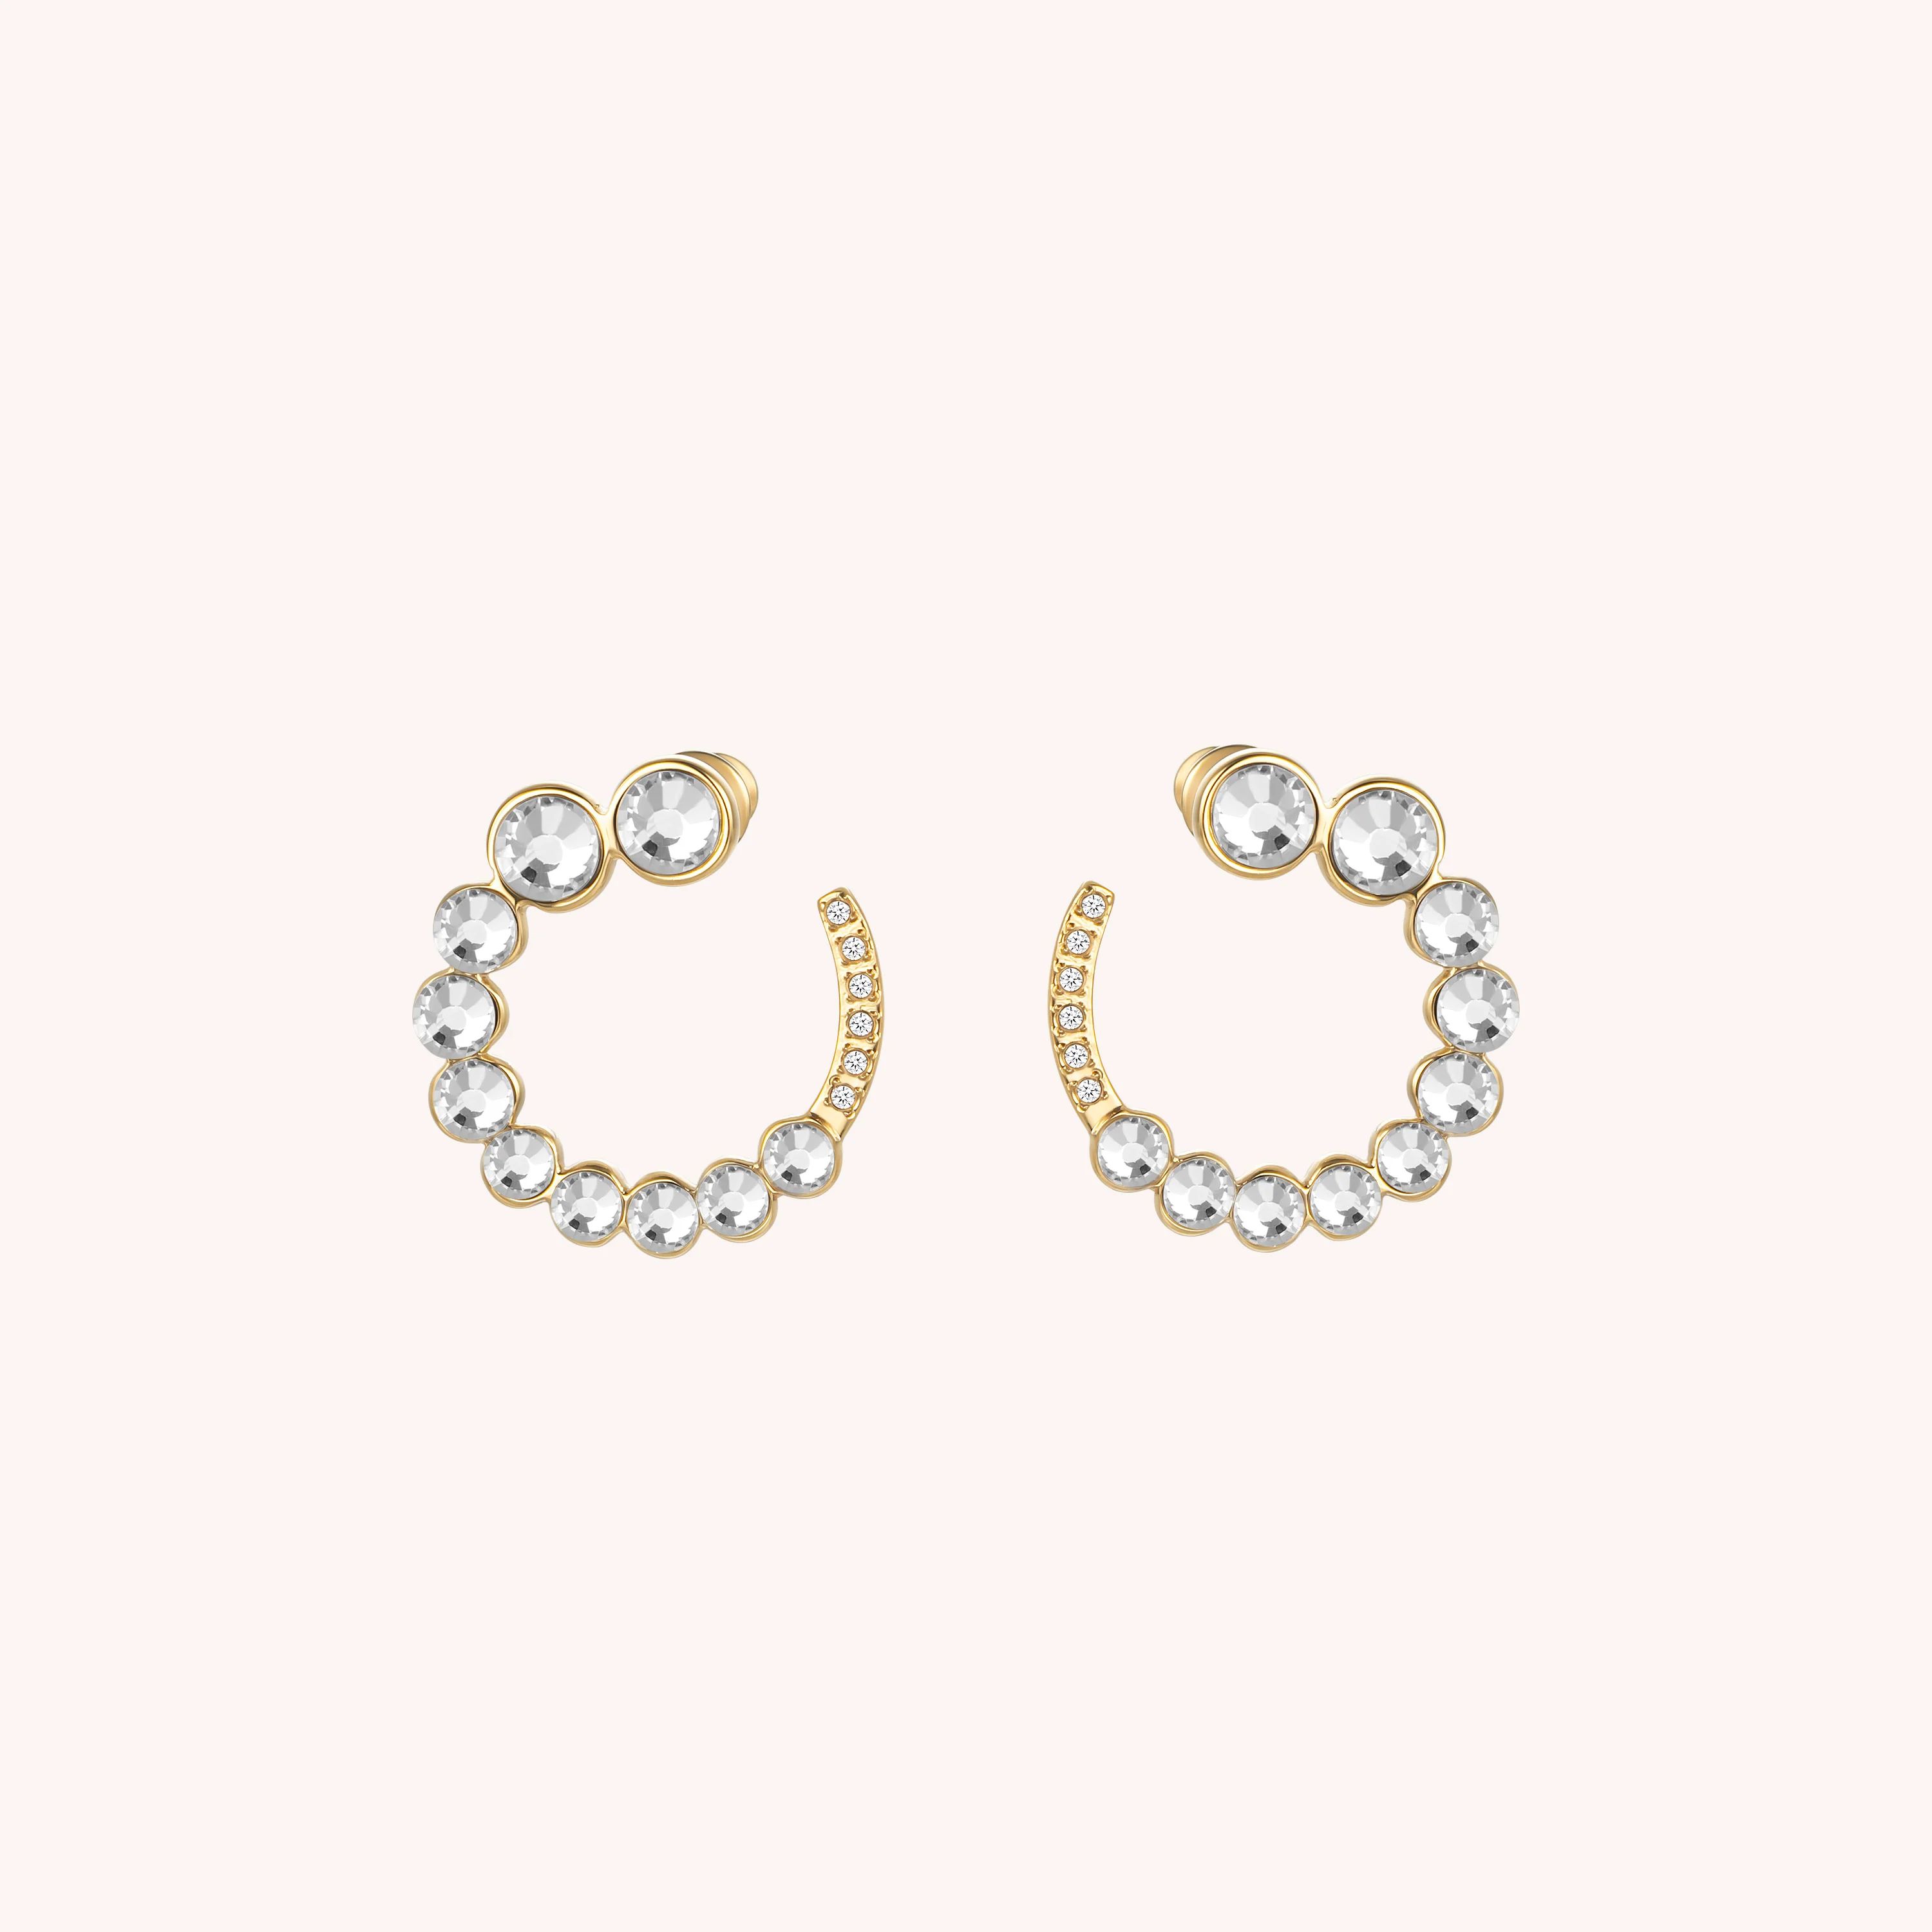 Droplet Crystal Earrings | Victoria Emerson